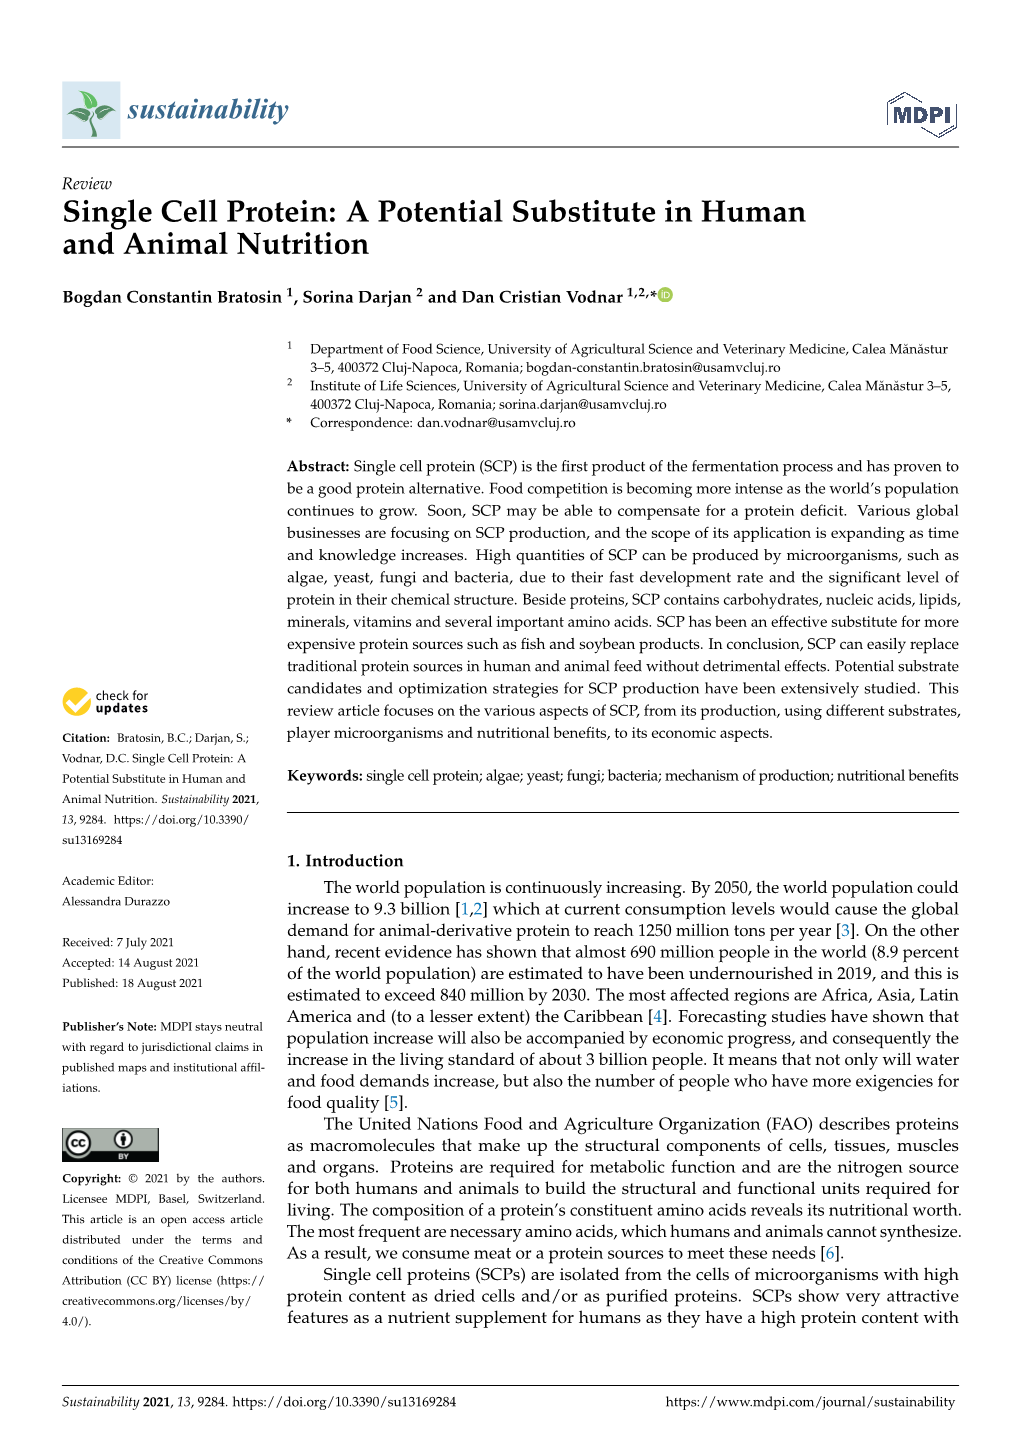 Single Cell Protein: a Potential Substitute in Human and Animal Nutrition